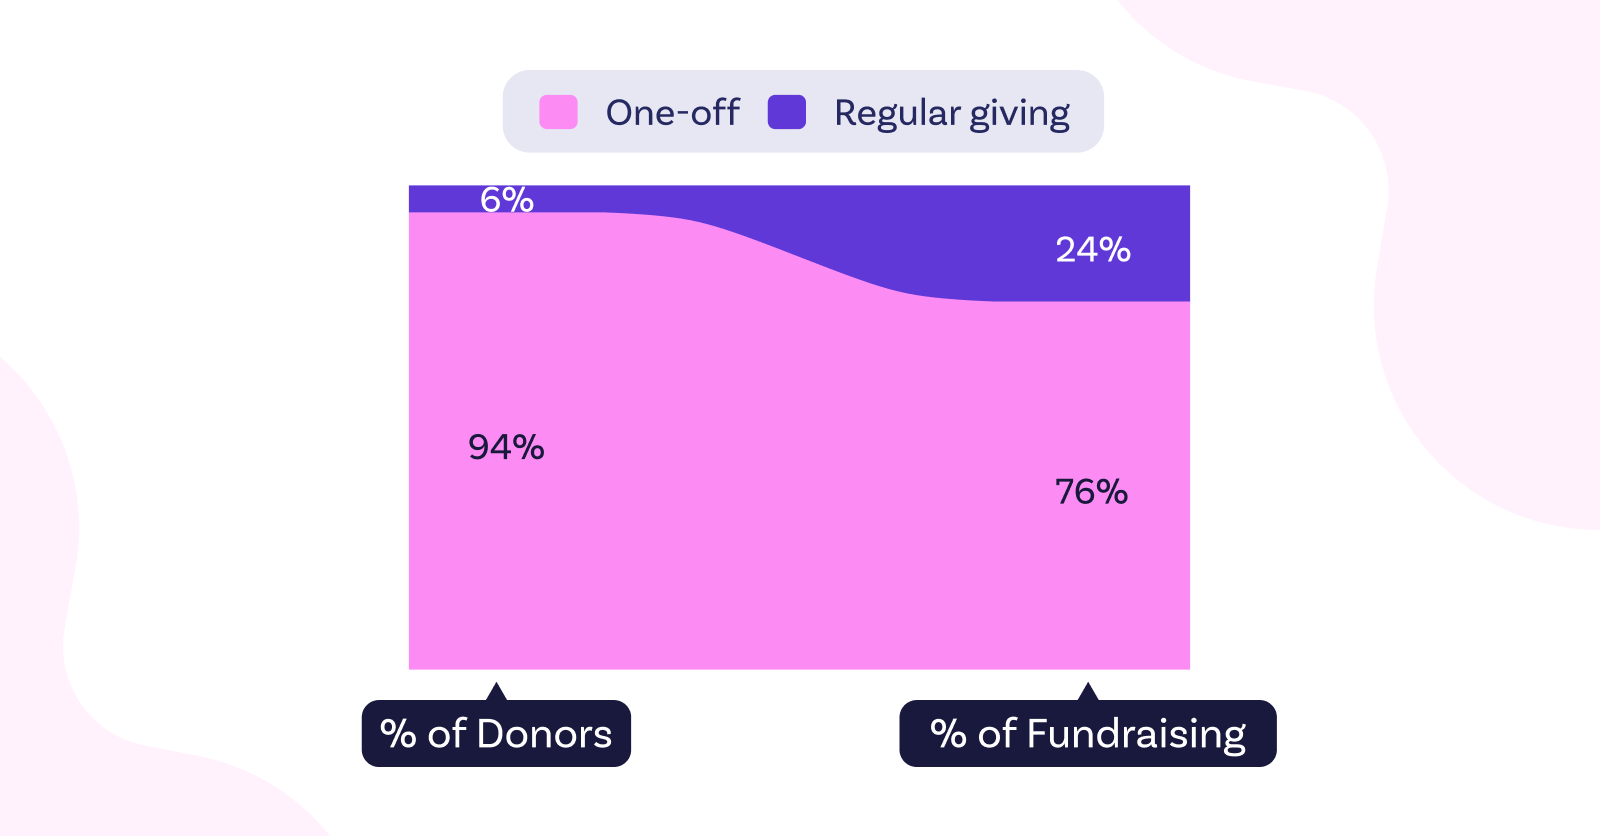 Graph showing a comparison of the percentage of donors and the percentage fundraising between one off and regular gifts.